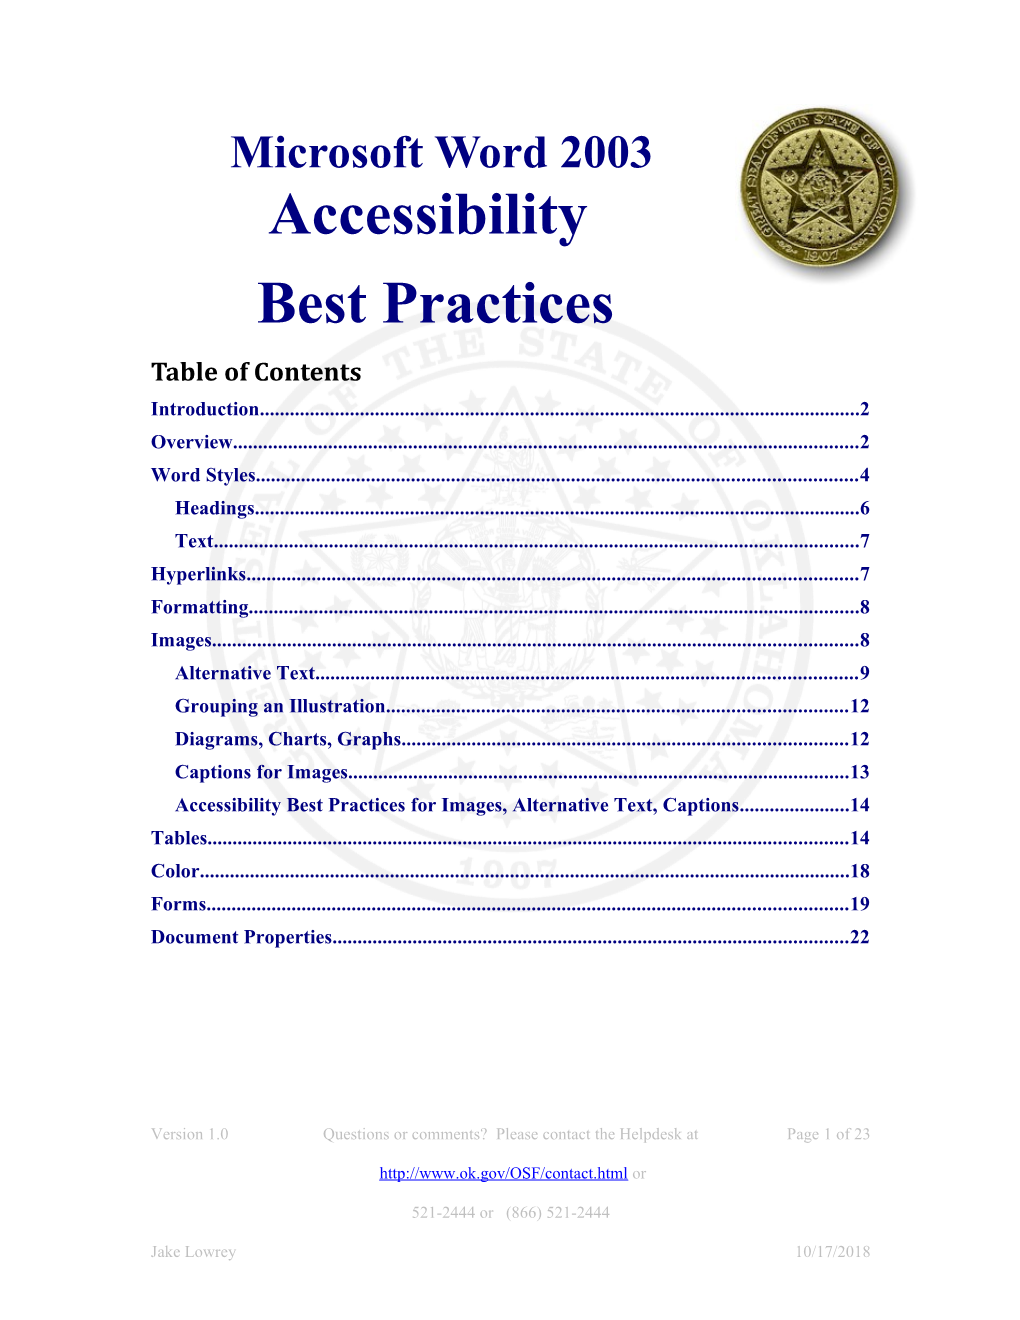 Accessibility Best Practices - Microsoft Word 2003